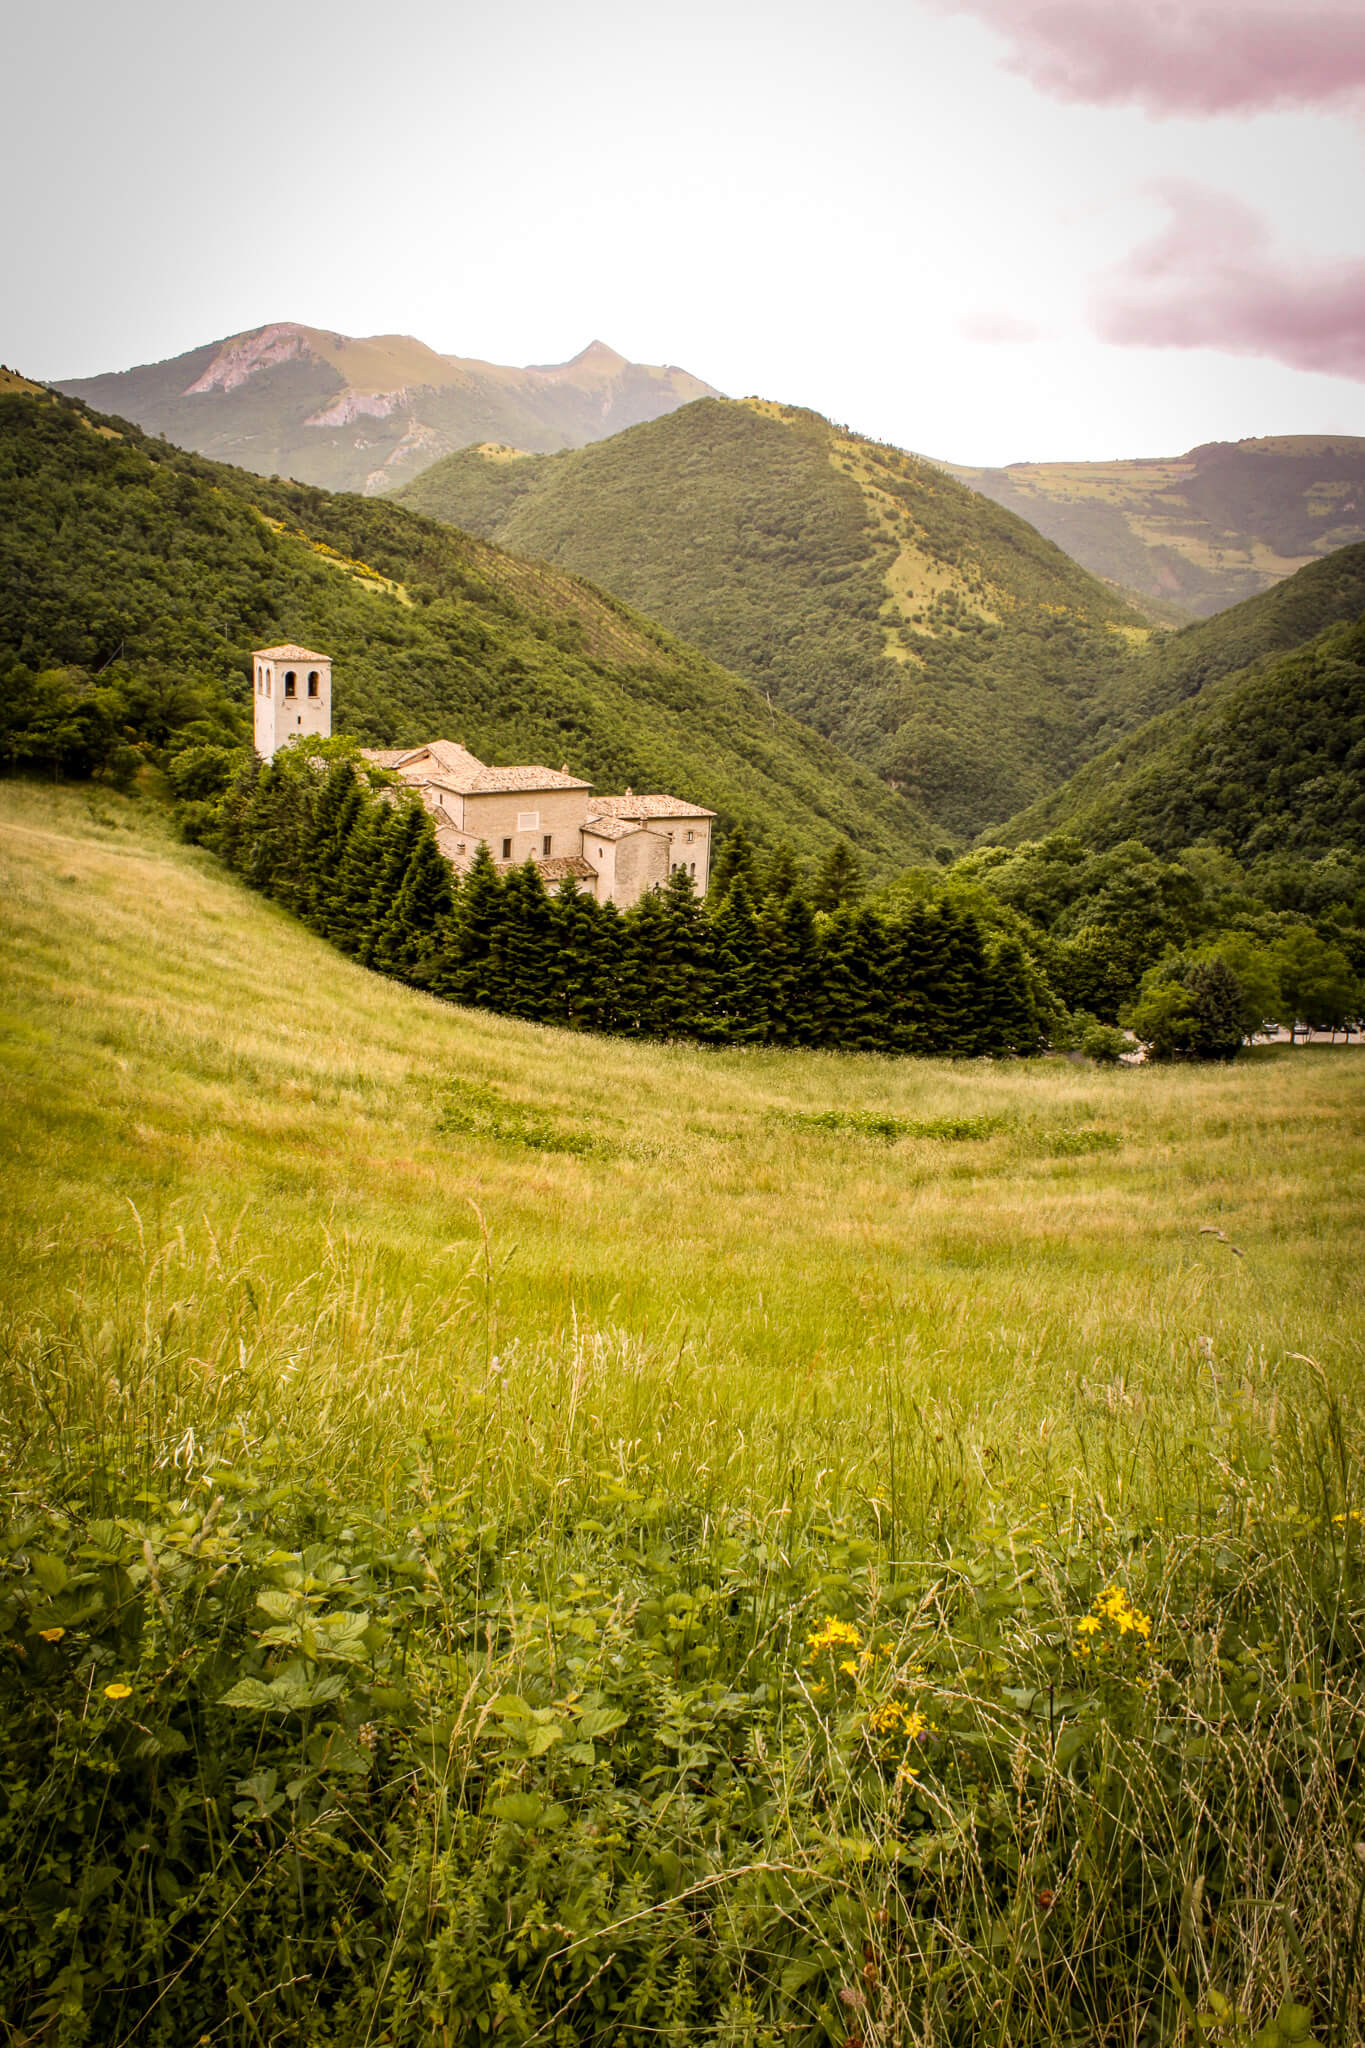 The Fonte Avellana Monastery nestled in the rolling hills